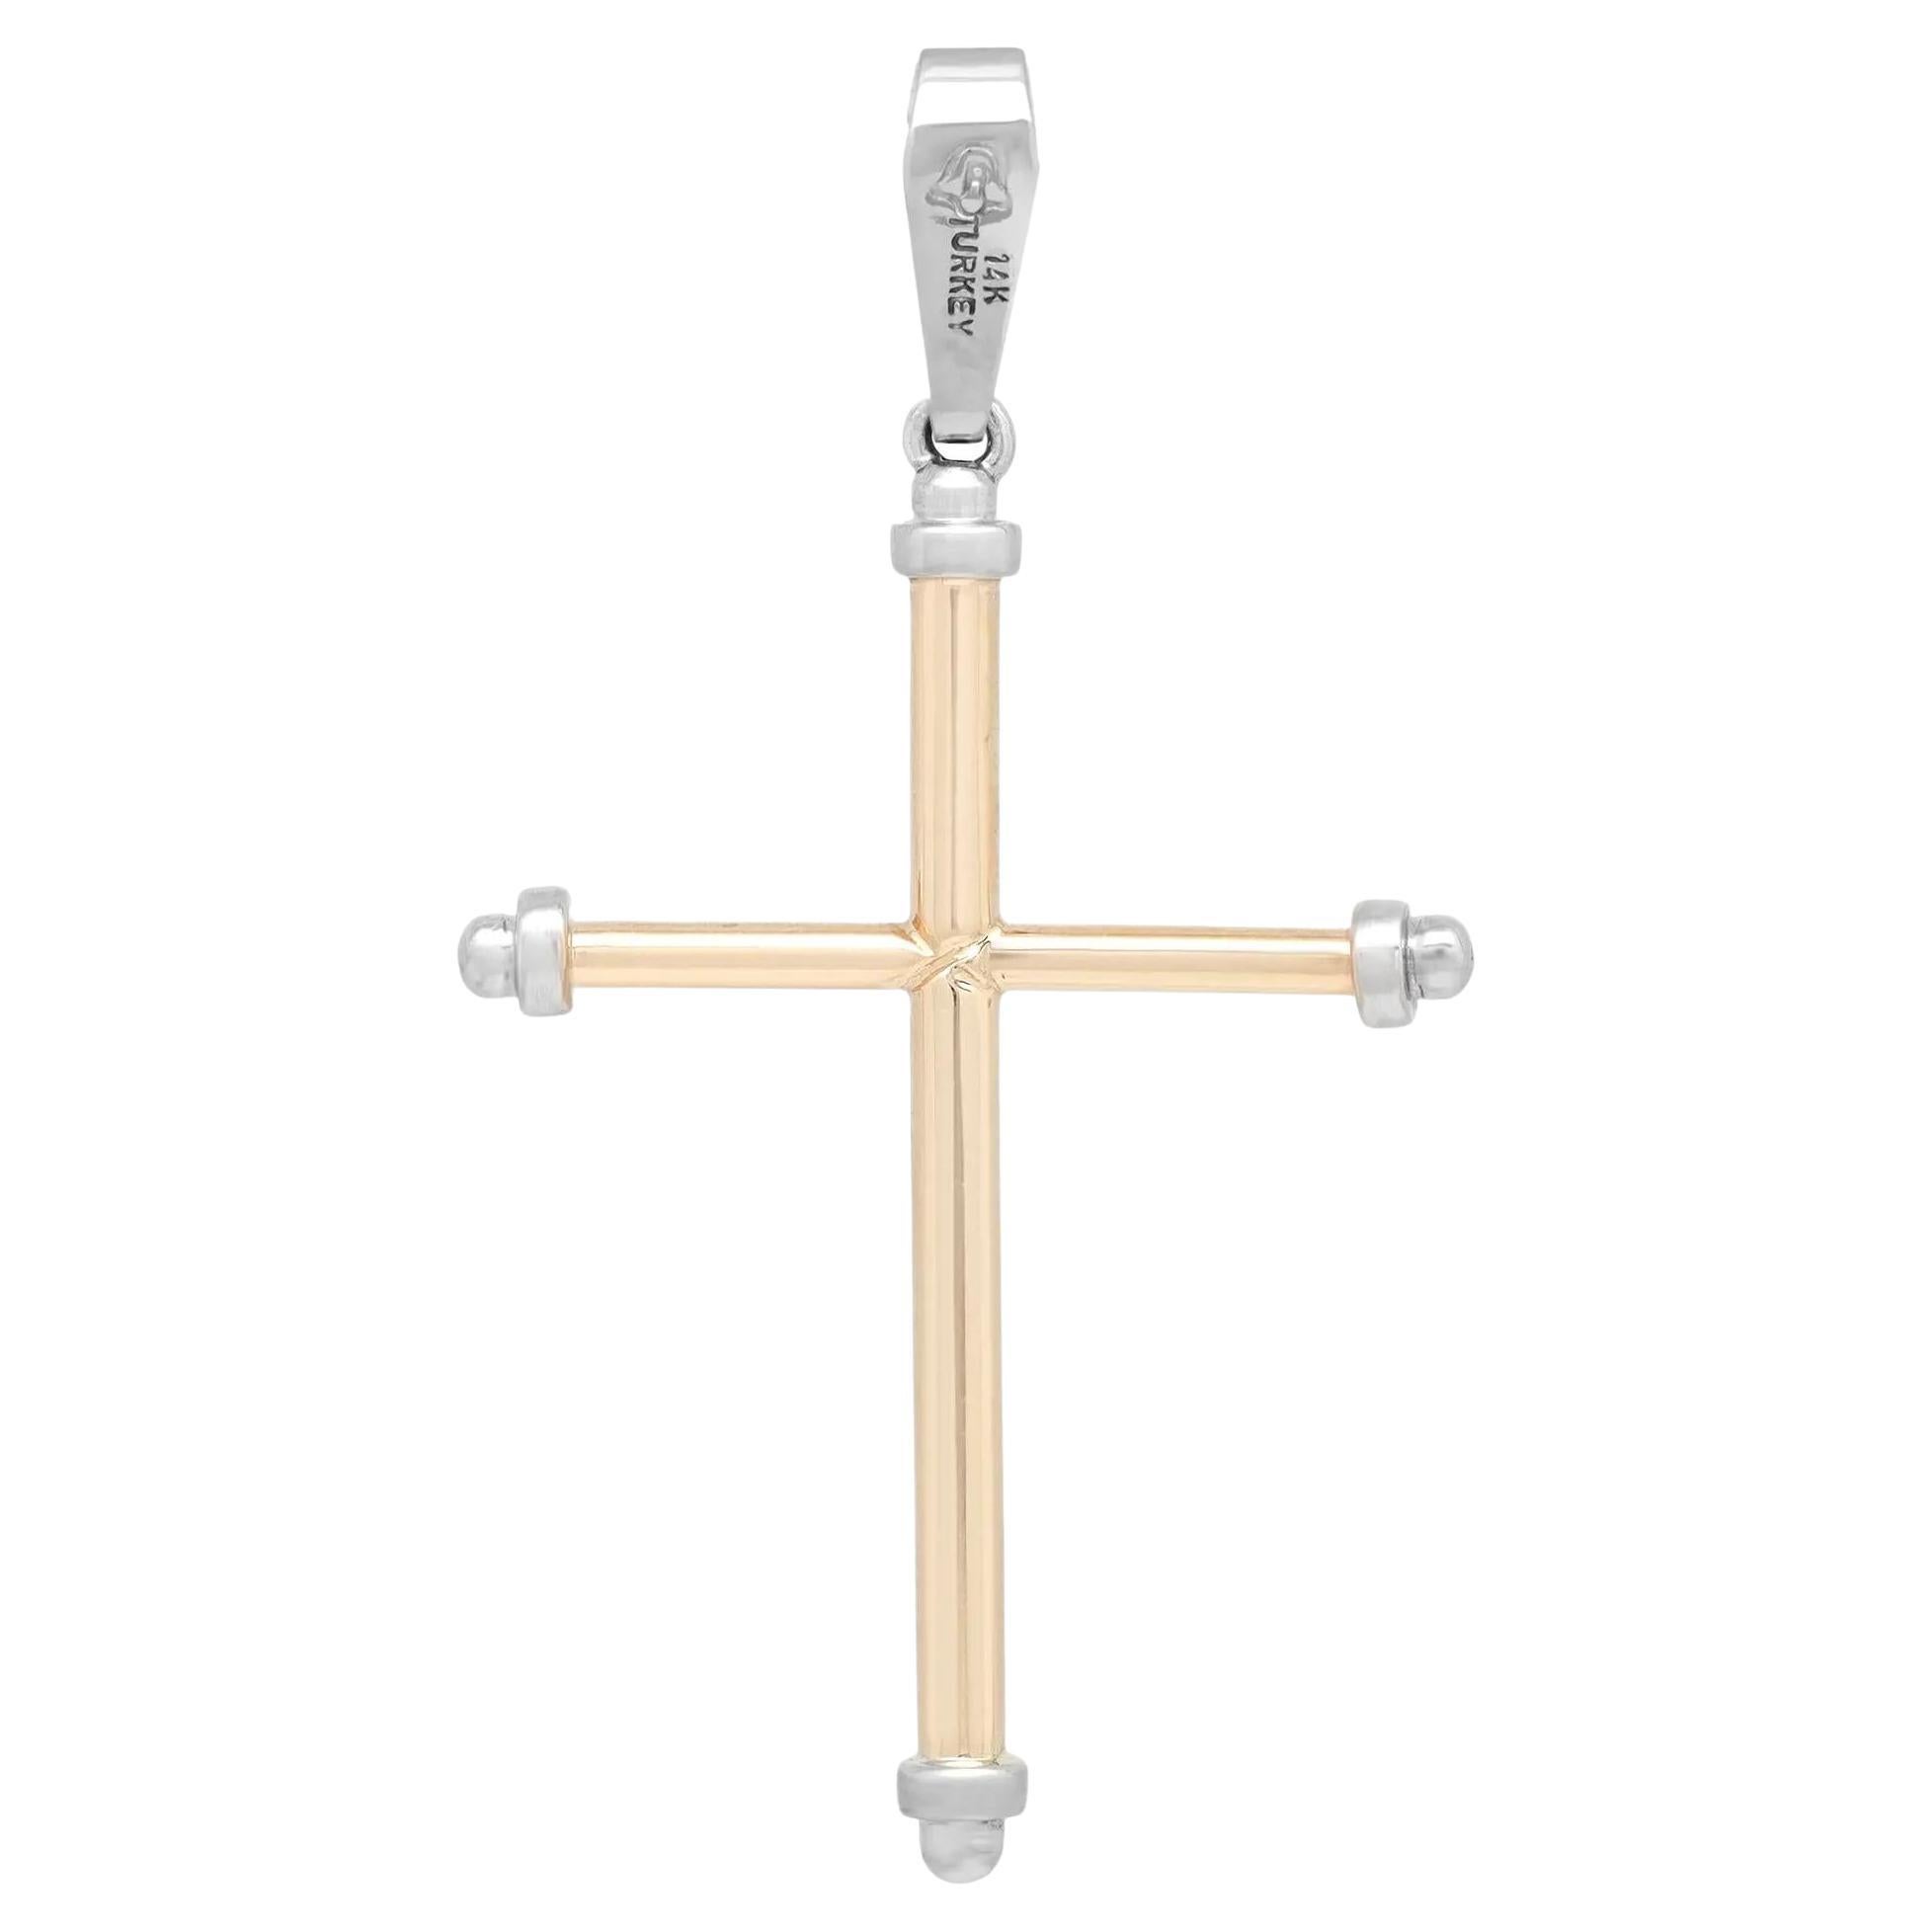 This meaningful cross pendant shines in lustrous 14K yellow and white gold. Features a rounded tube with white gold capped edges cross pendant. Pendant size: 2 inches x 1 inch. Total weight: 2.39 grams. Minimalist and stylish, perfect for everyday